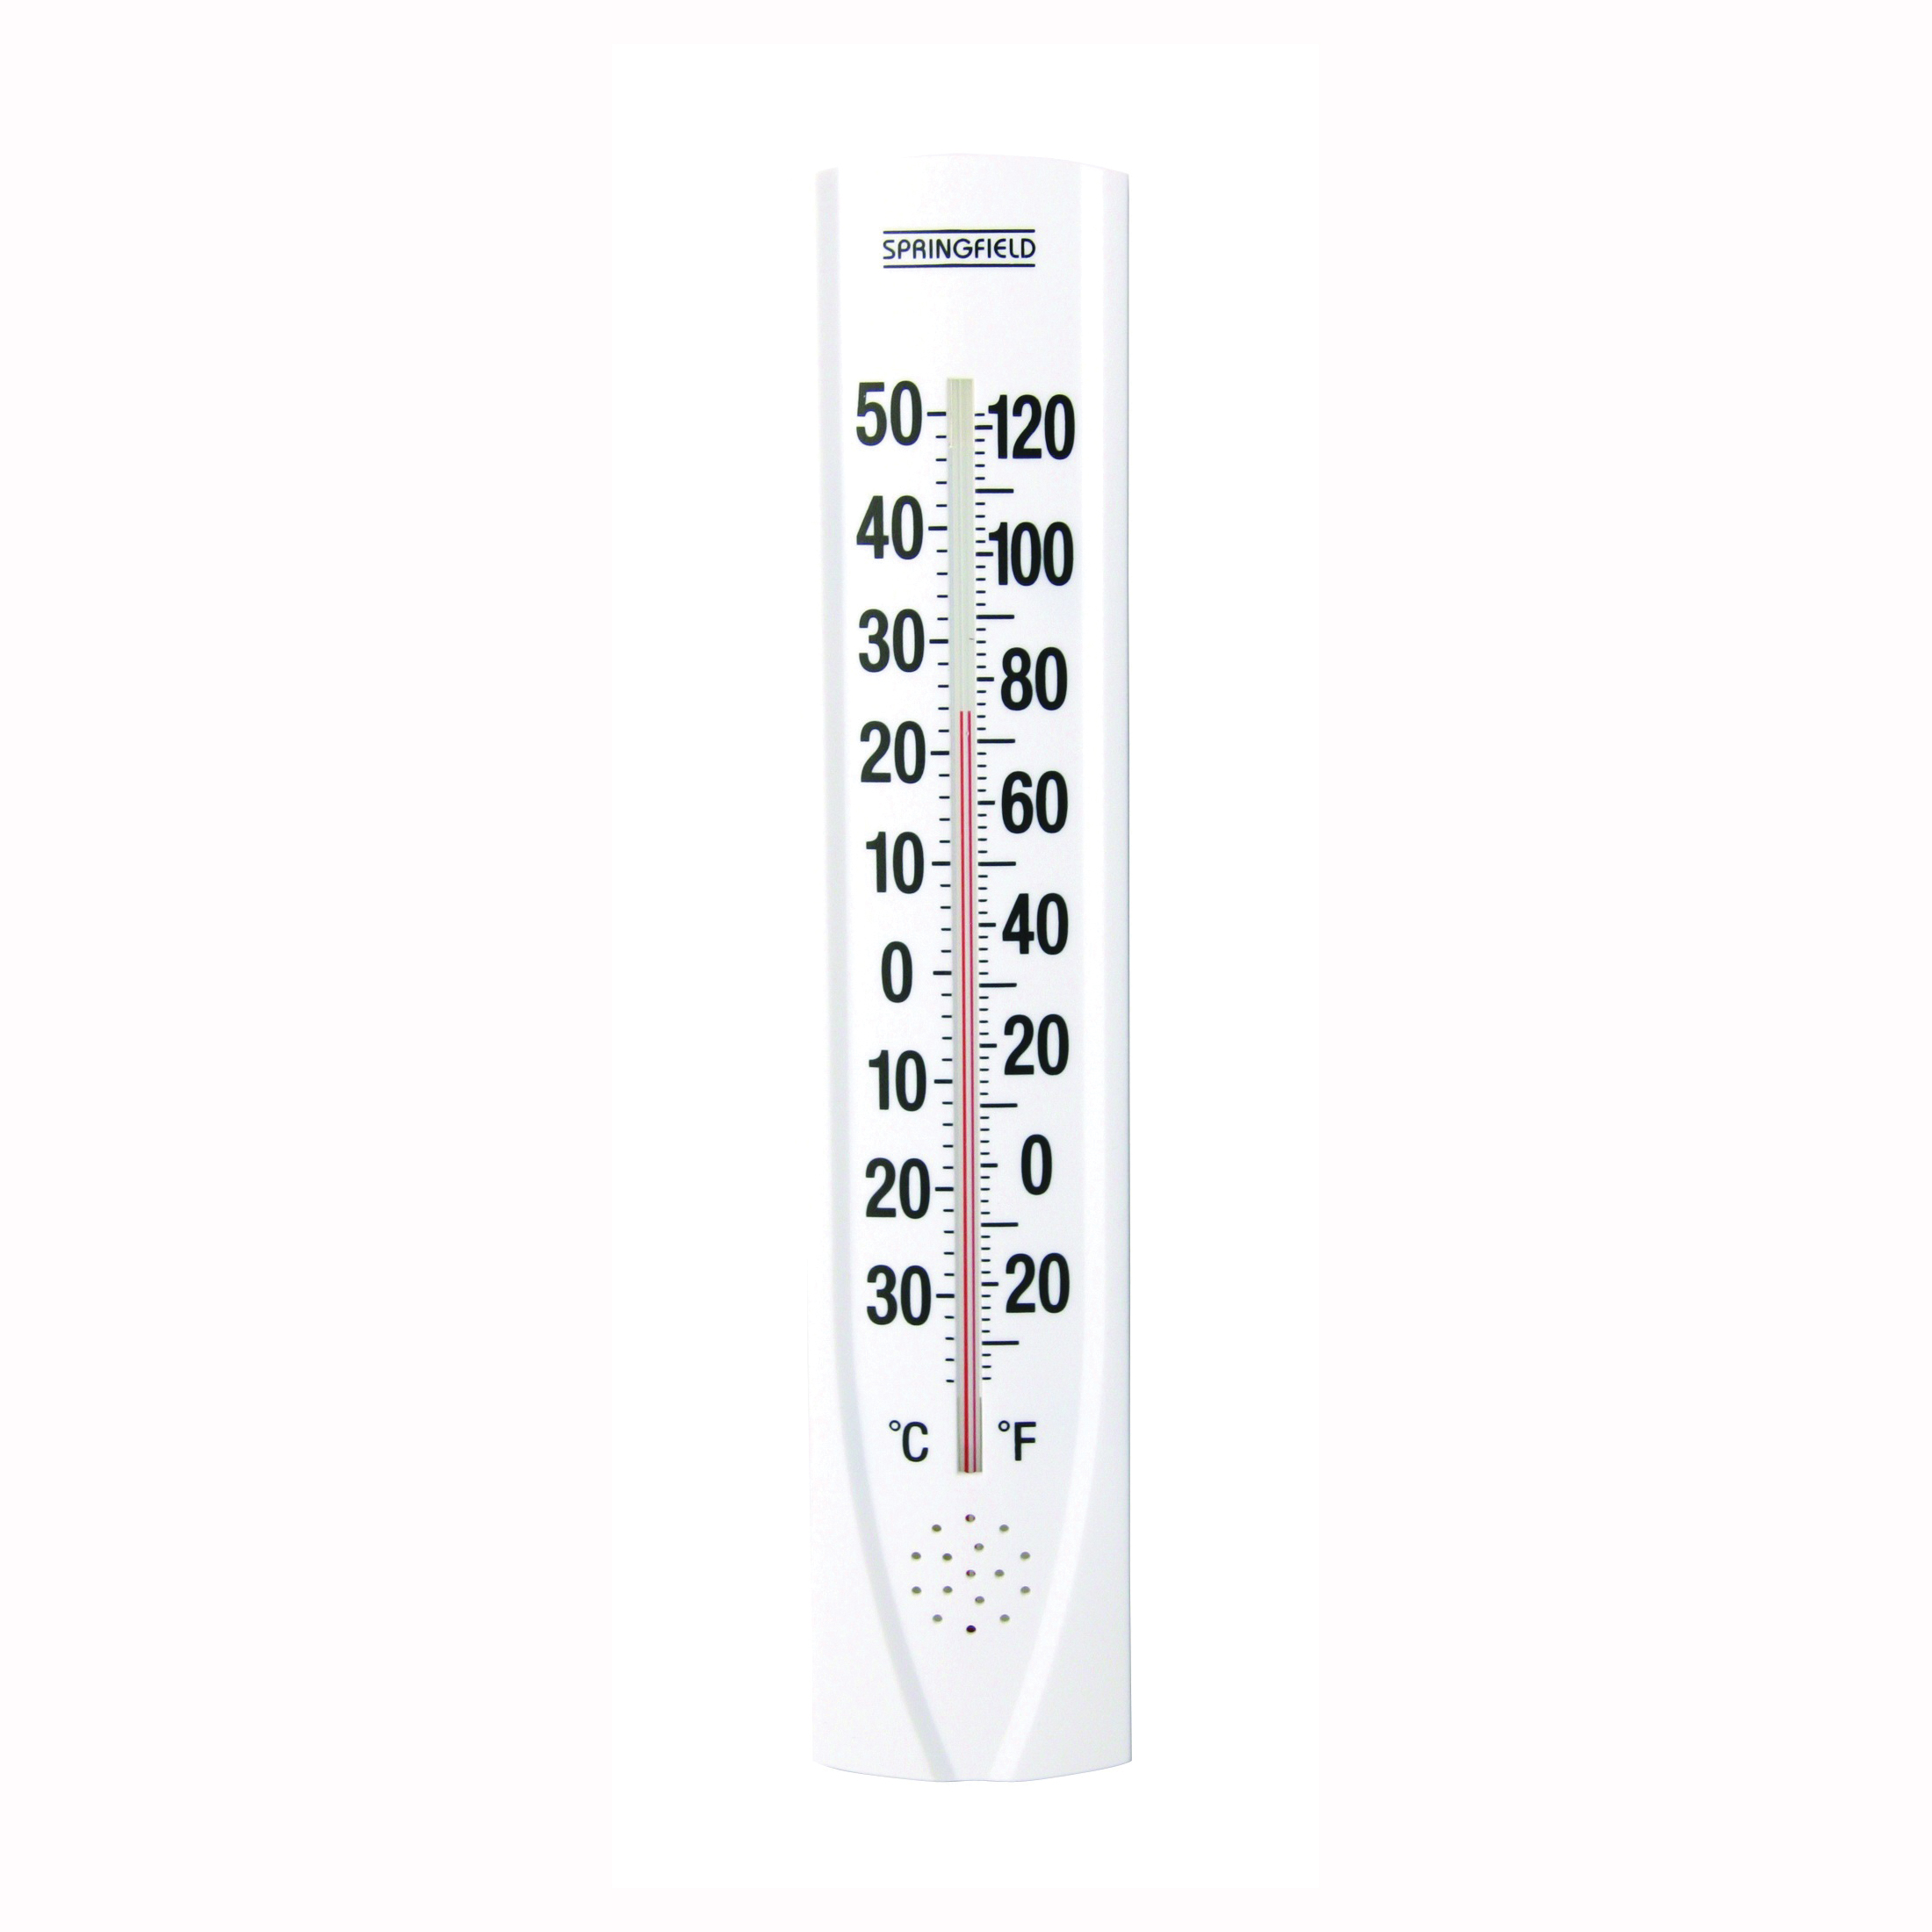 Taylor 90111 Thermometer, Resin Casing, White Casing - 1